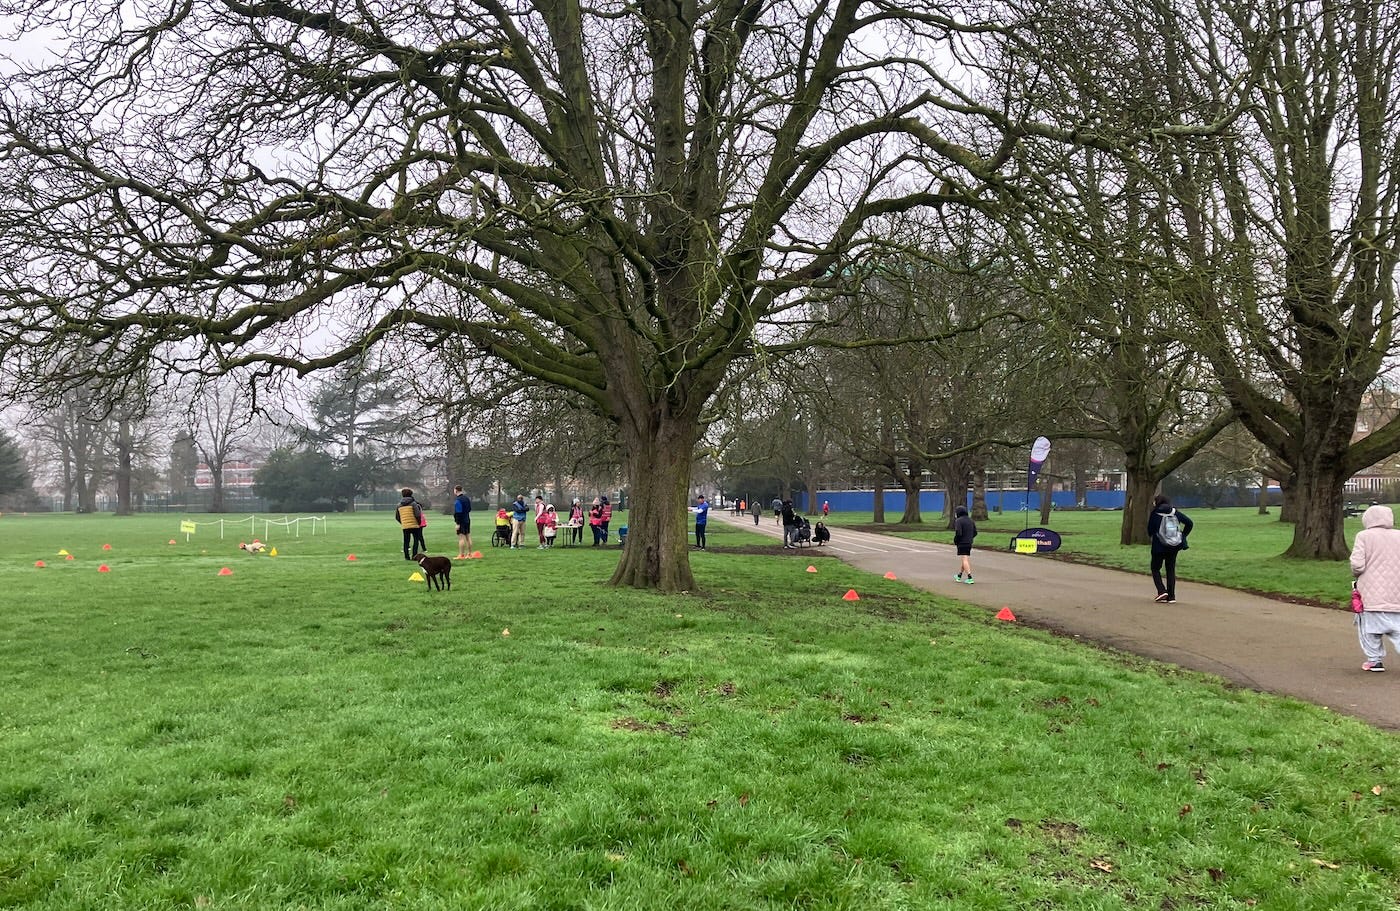 Group of volunteers in pink hi-viz on the grass under a large tree